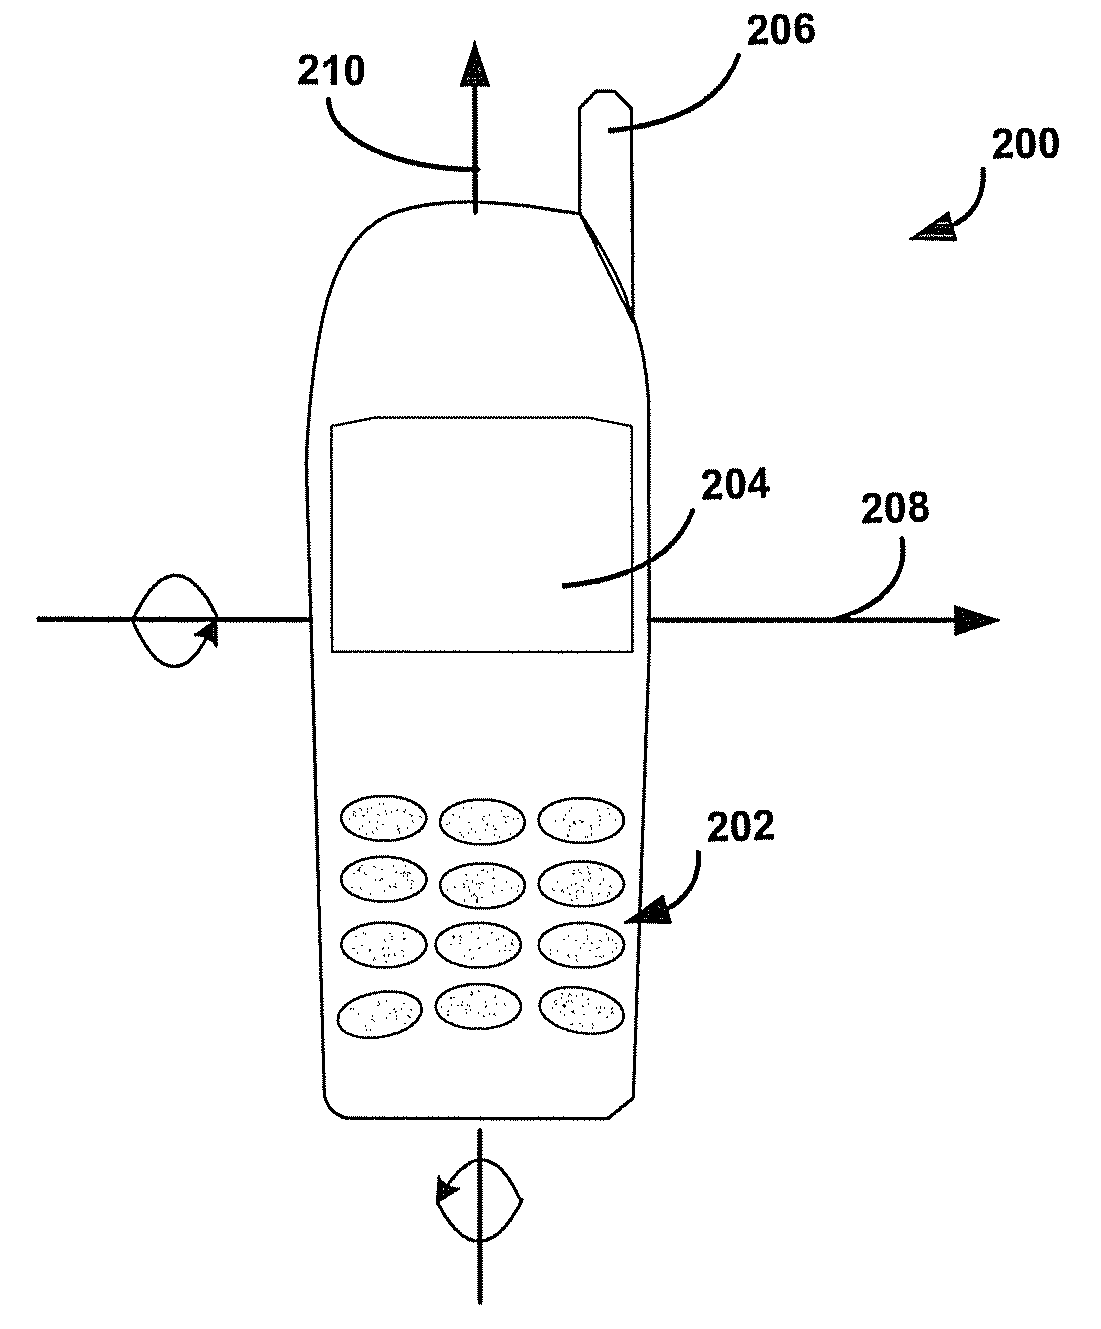 Concurrent data entry for a portable device